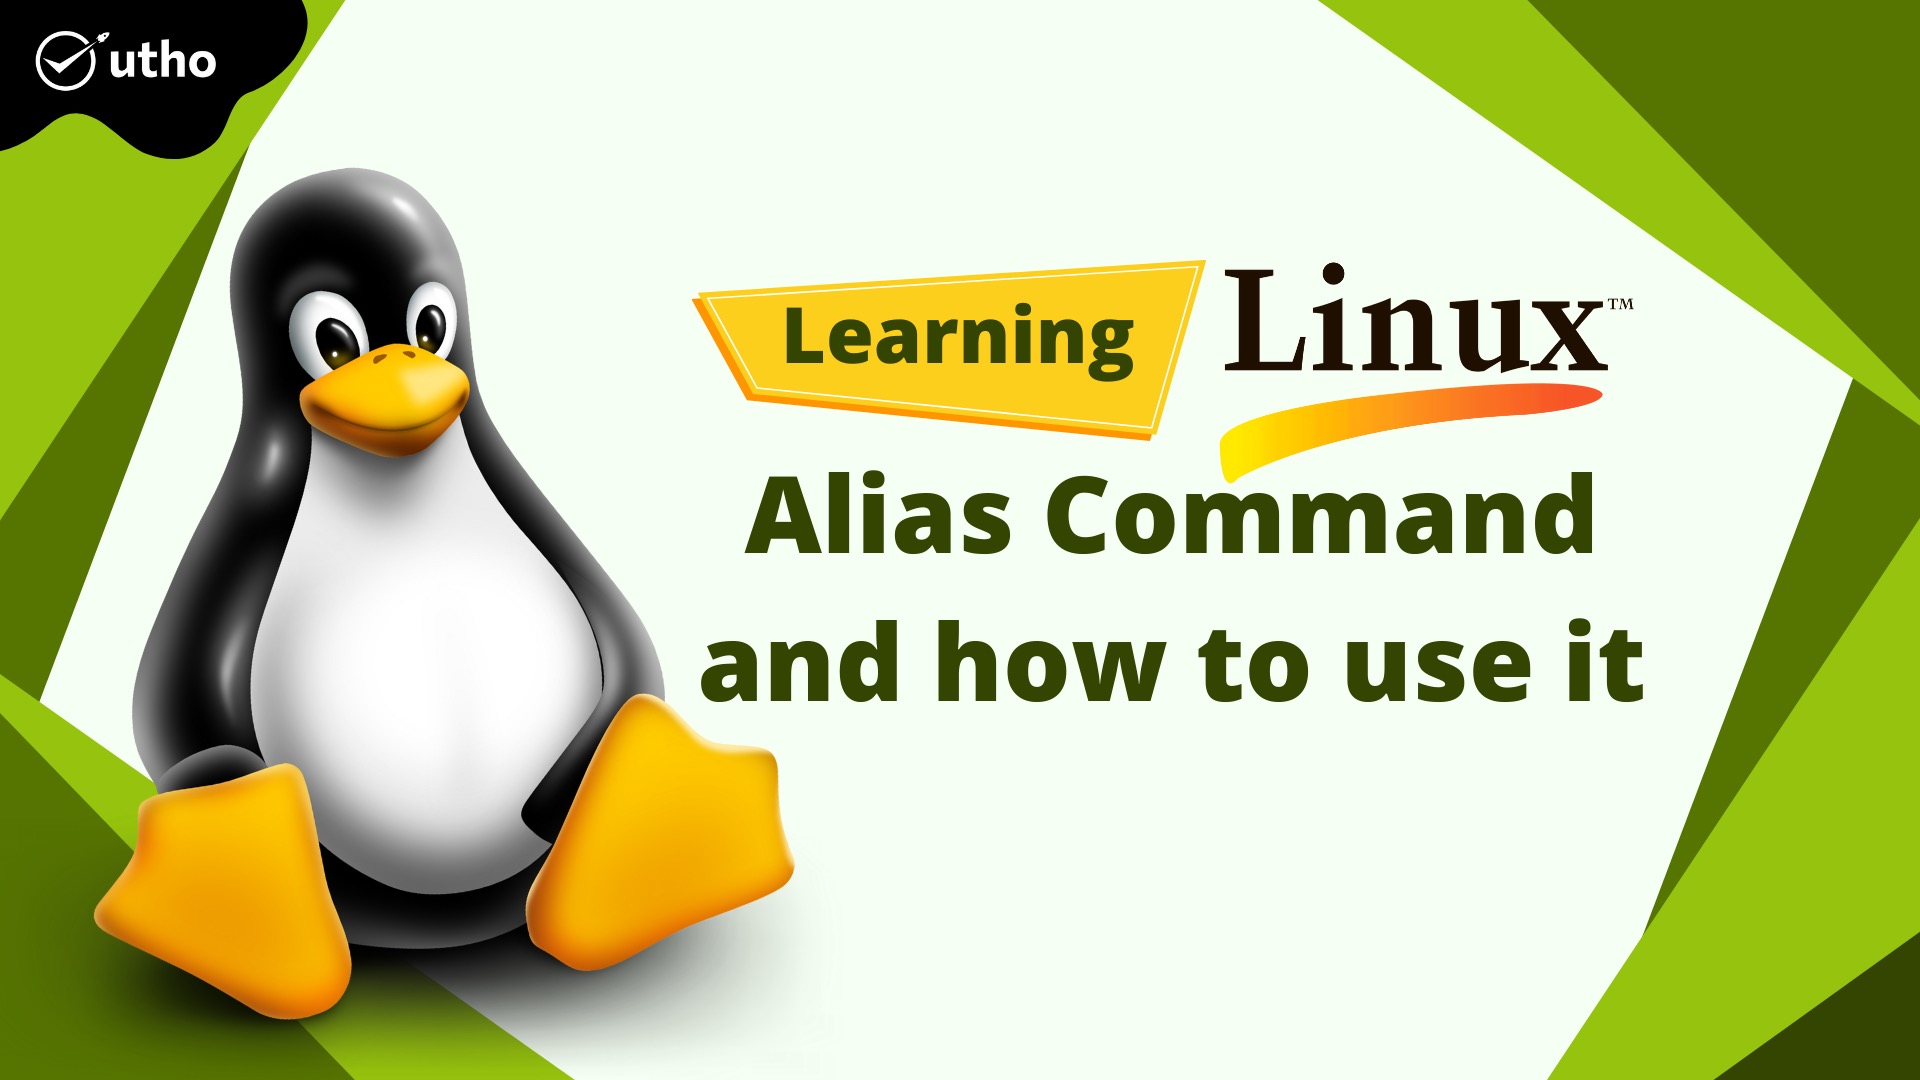 Learning the Linux Alias Command and How to Use It